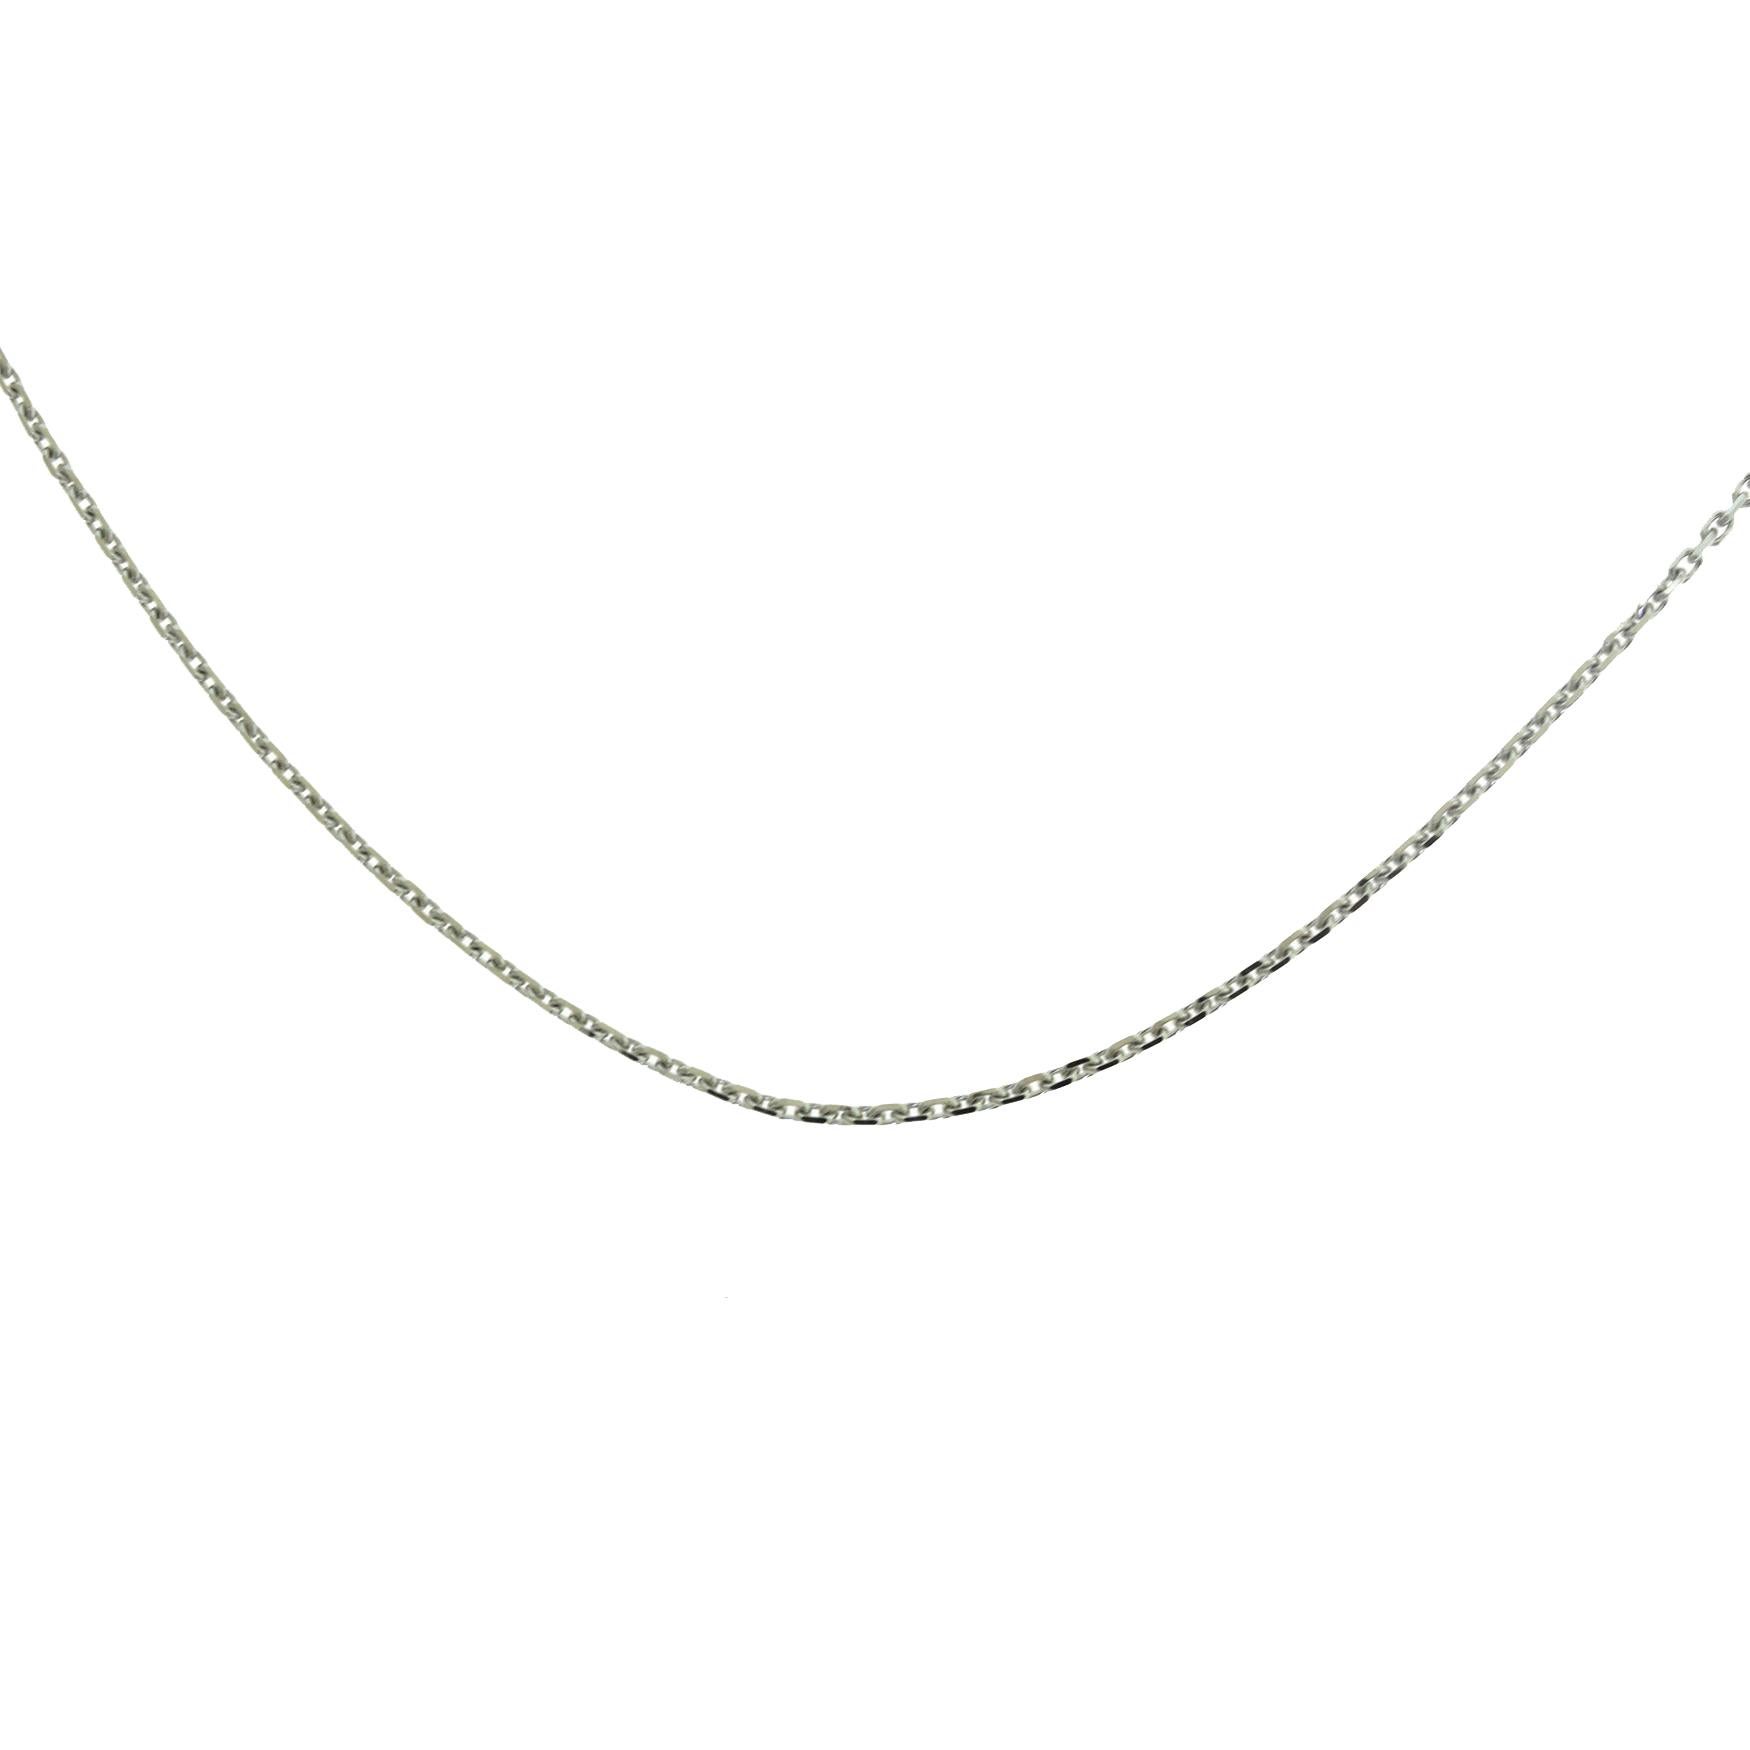 Van Cleef & Arpels 18 Karat White Gold Angle Filed Trace Chain